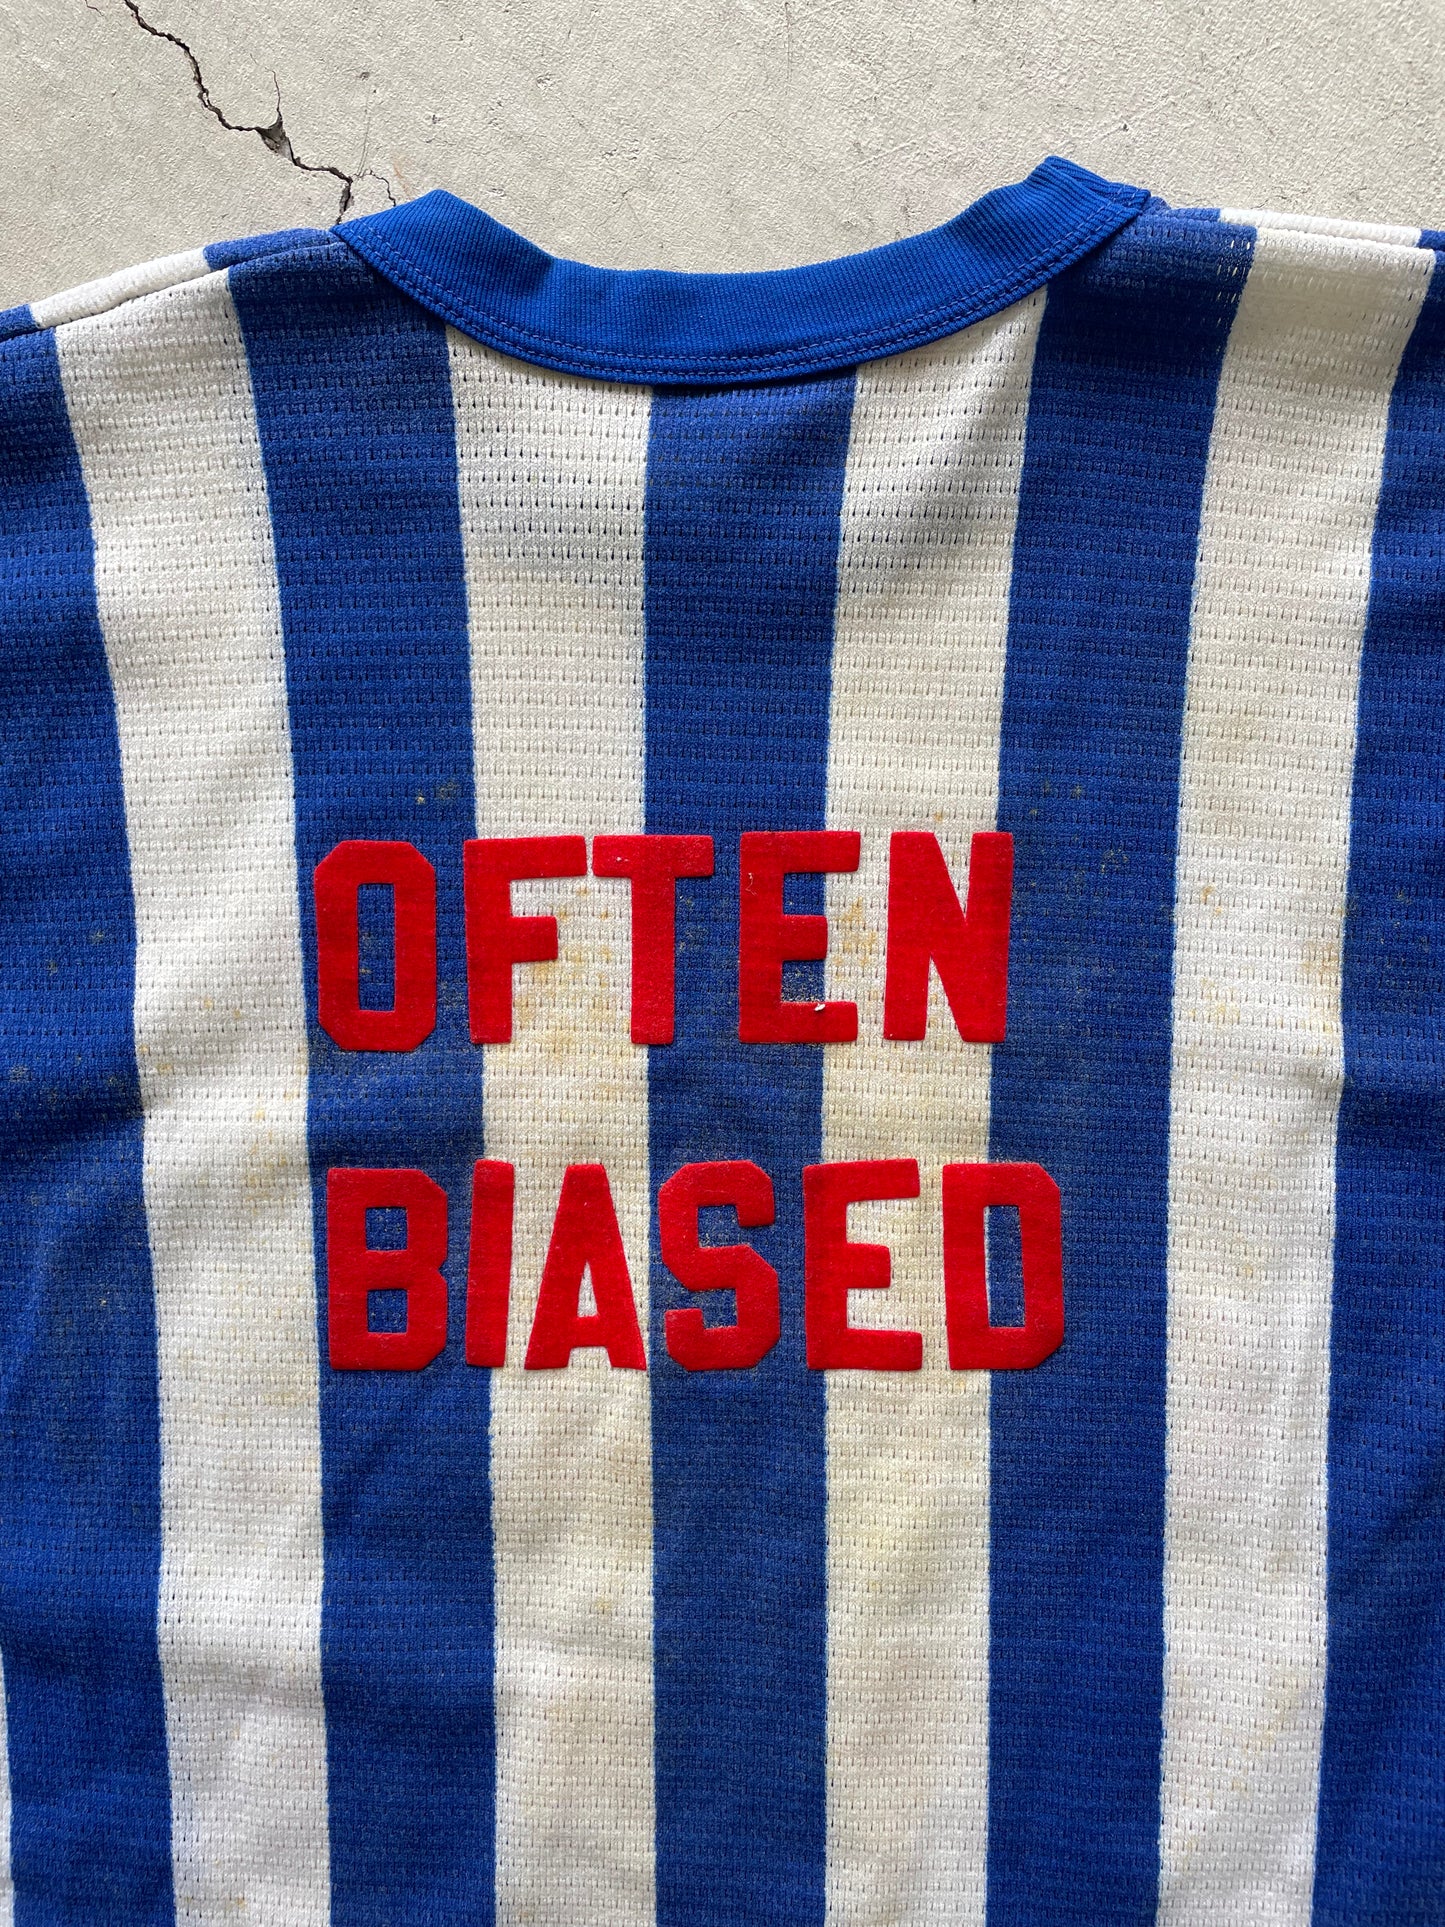 70s Russell Mesh Referee Tee- L